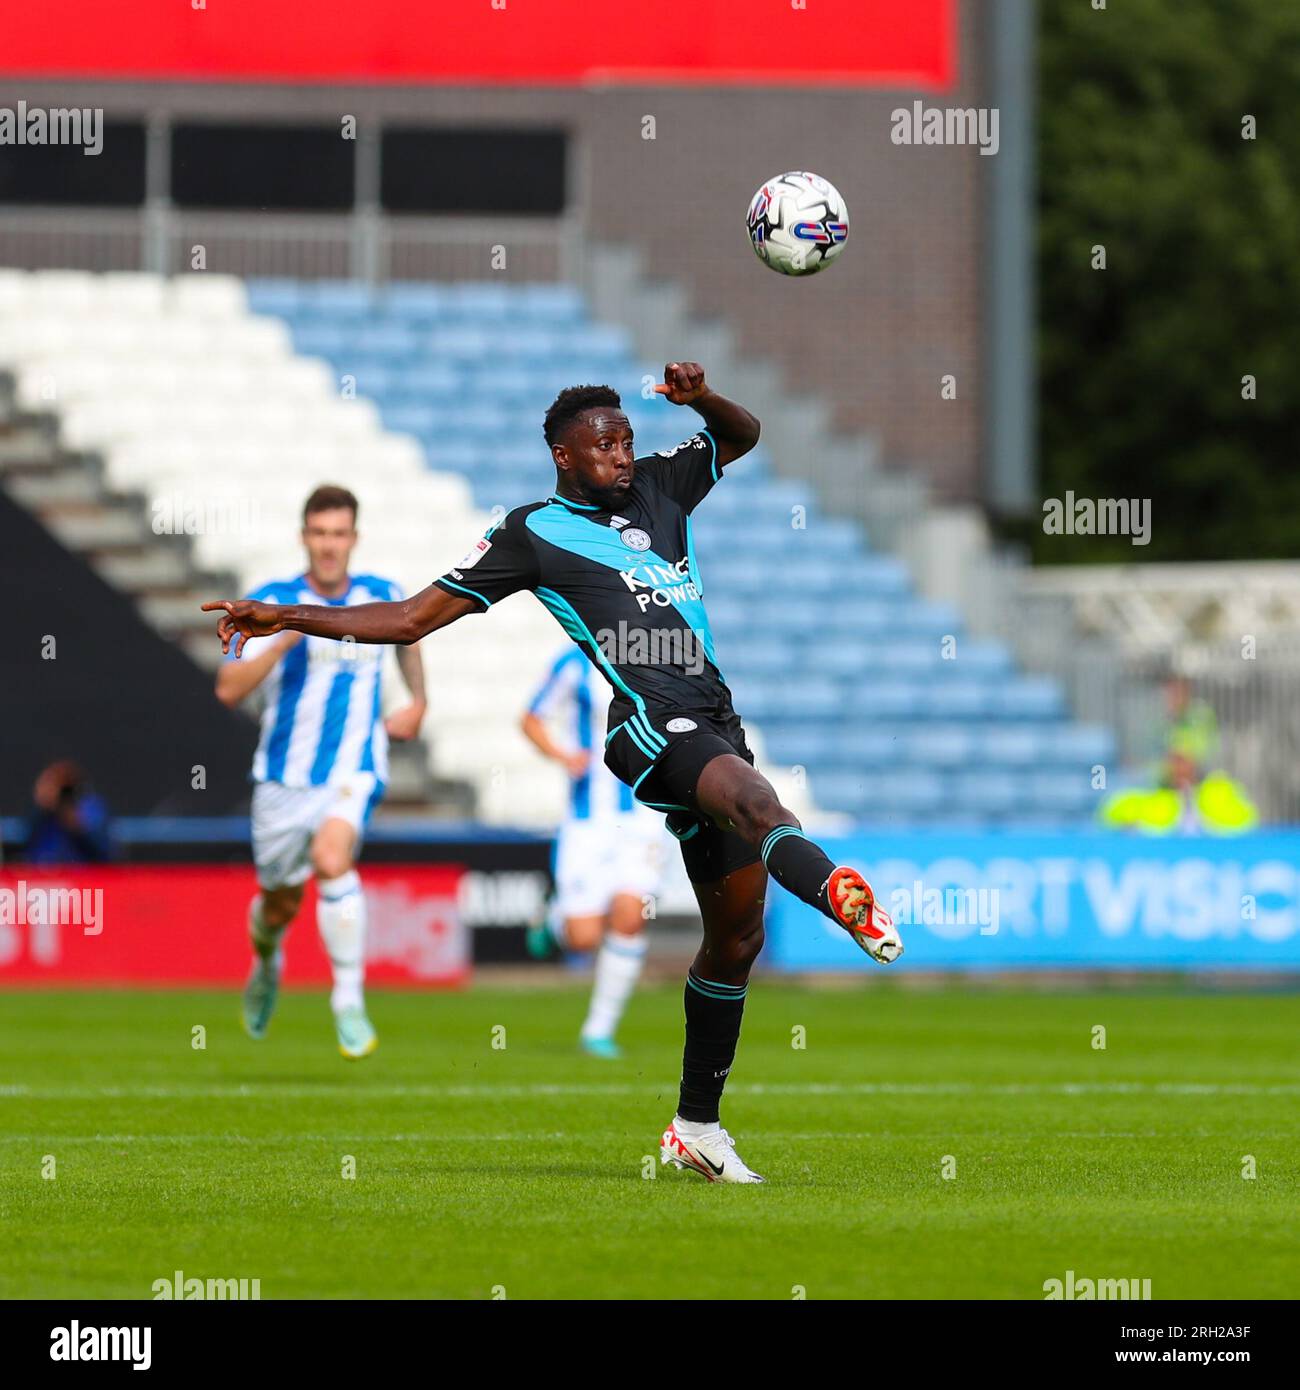 John Smith's Stadium, Huddersfield, England - 12th August 2023 Wilfred Ndidi (25) of Leicester City attempts to control the ball - during the game Huddersfield Town v Leicester City, Sky Bet Championship,  2023/24, John Smith's Stadium, Huddersfield, England - 12th August 2023 Credit: Mathew Marsden/WhiteRosePhotos/Alamy Live News Stock Photo